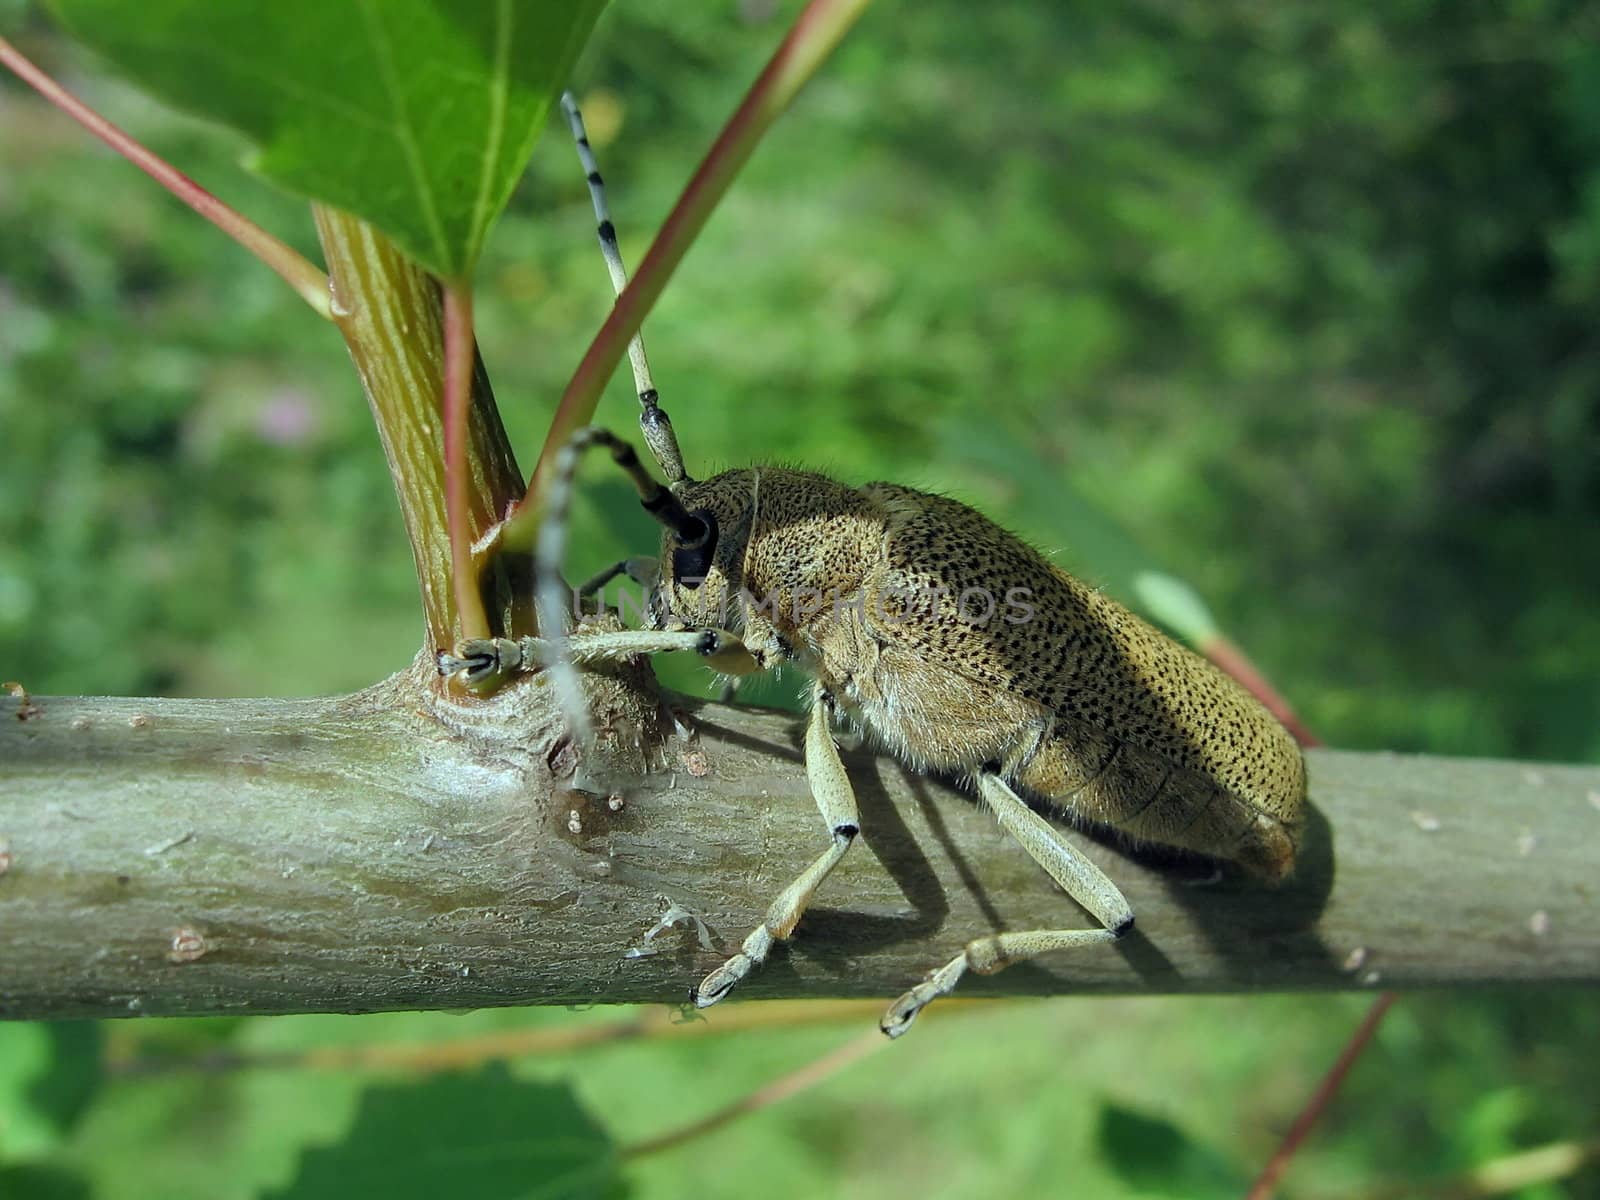 Large beetle on the branch by tomatto